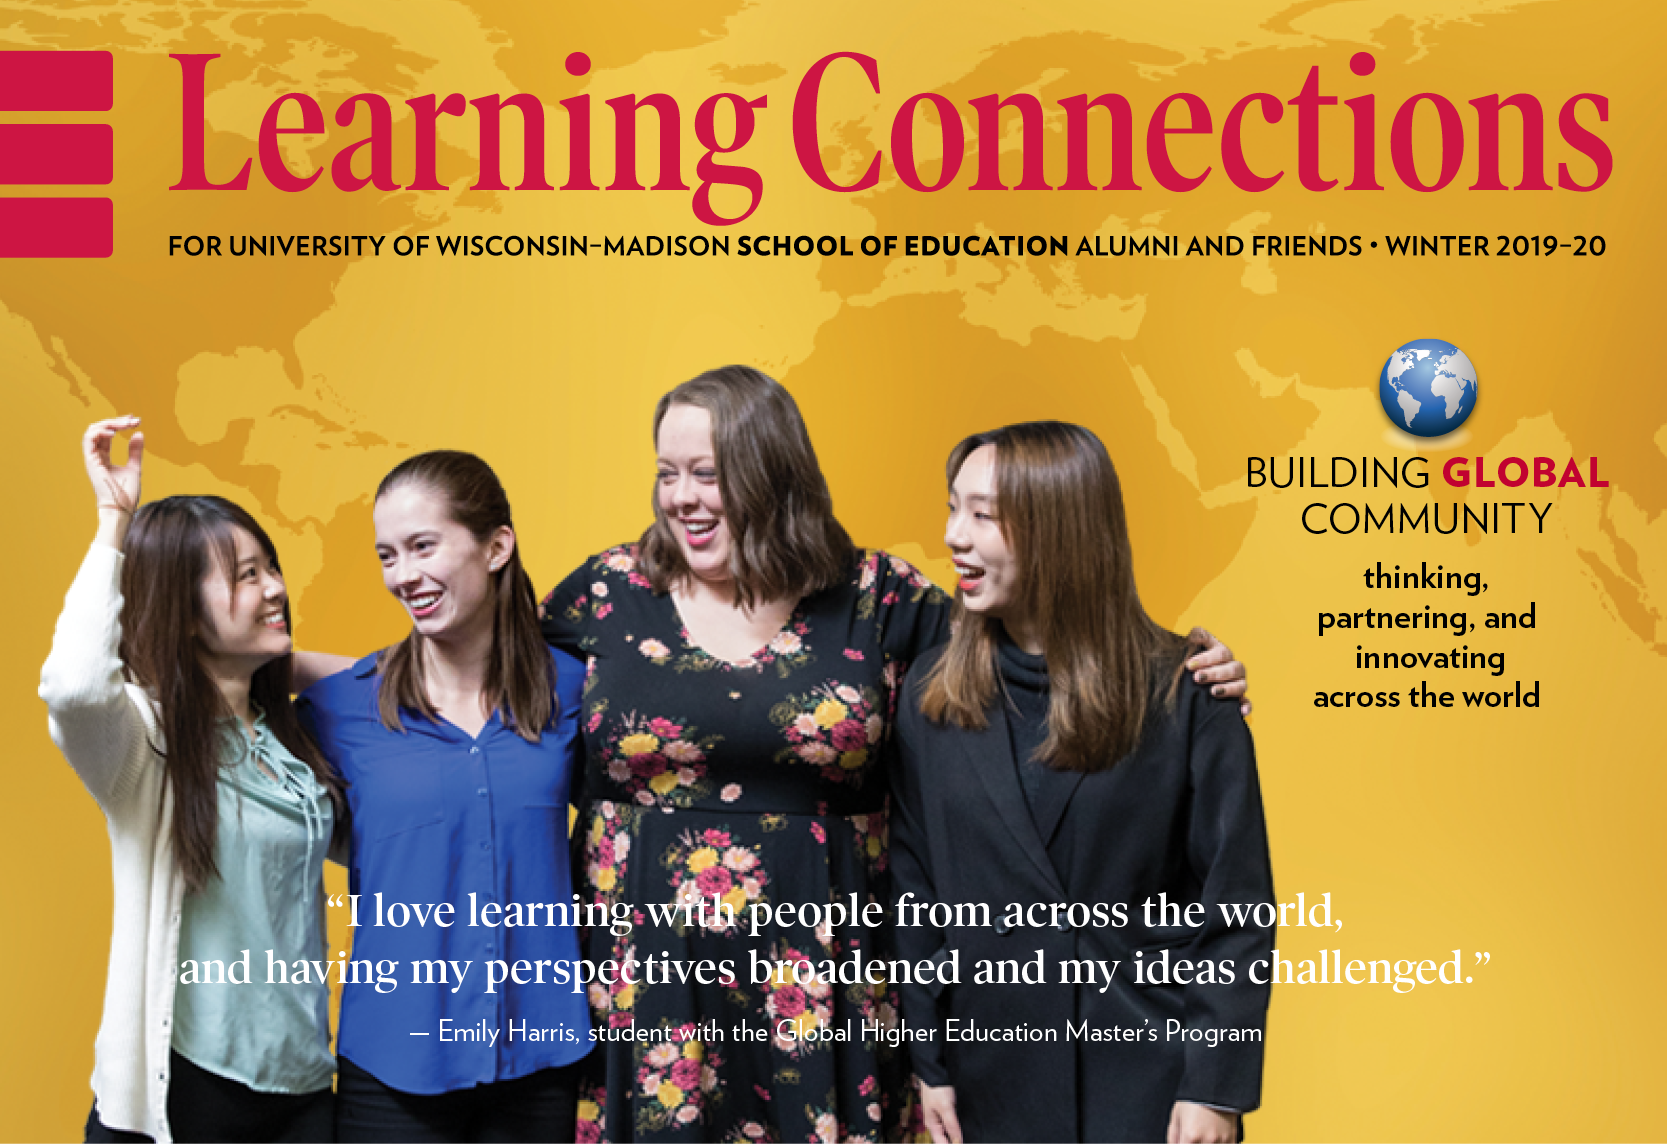 learning connections magazine cover showing global higher education students and a bit of text saying "Building global community"